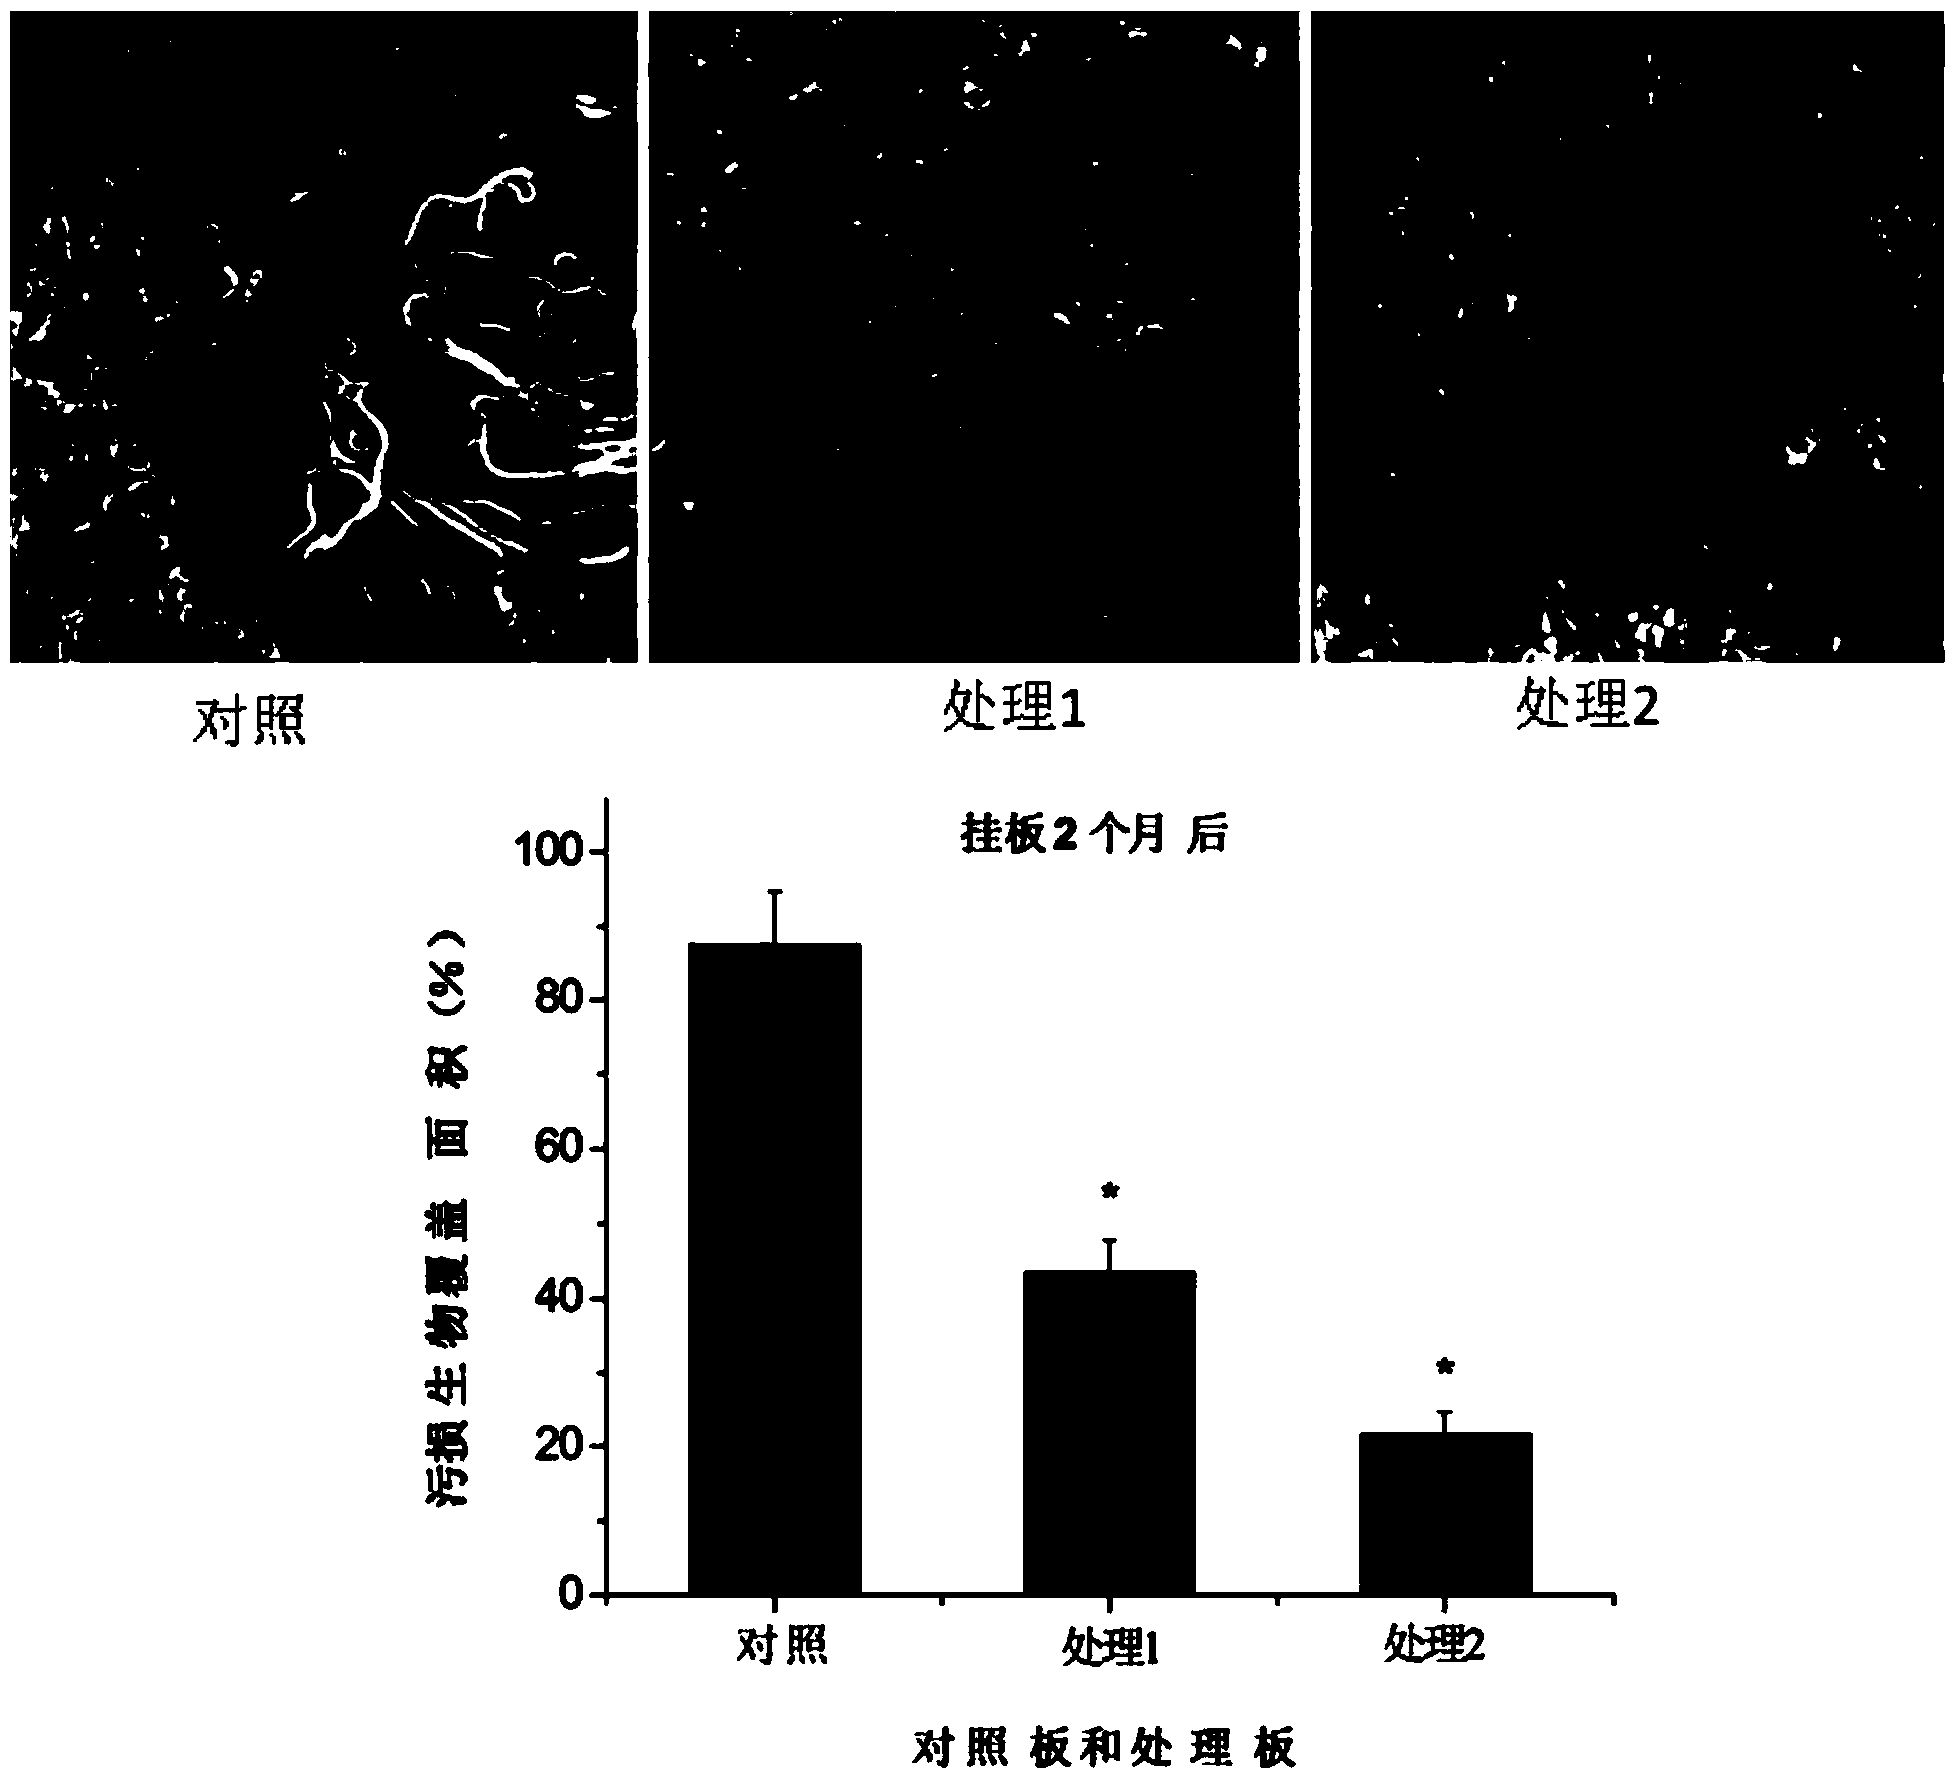 Application of class of butenolide compounds in preparation of marine biofouling prevention coating material